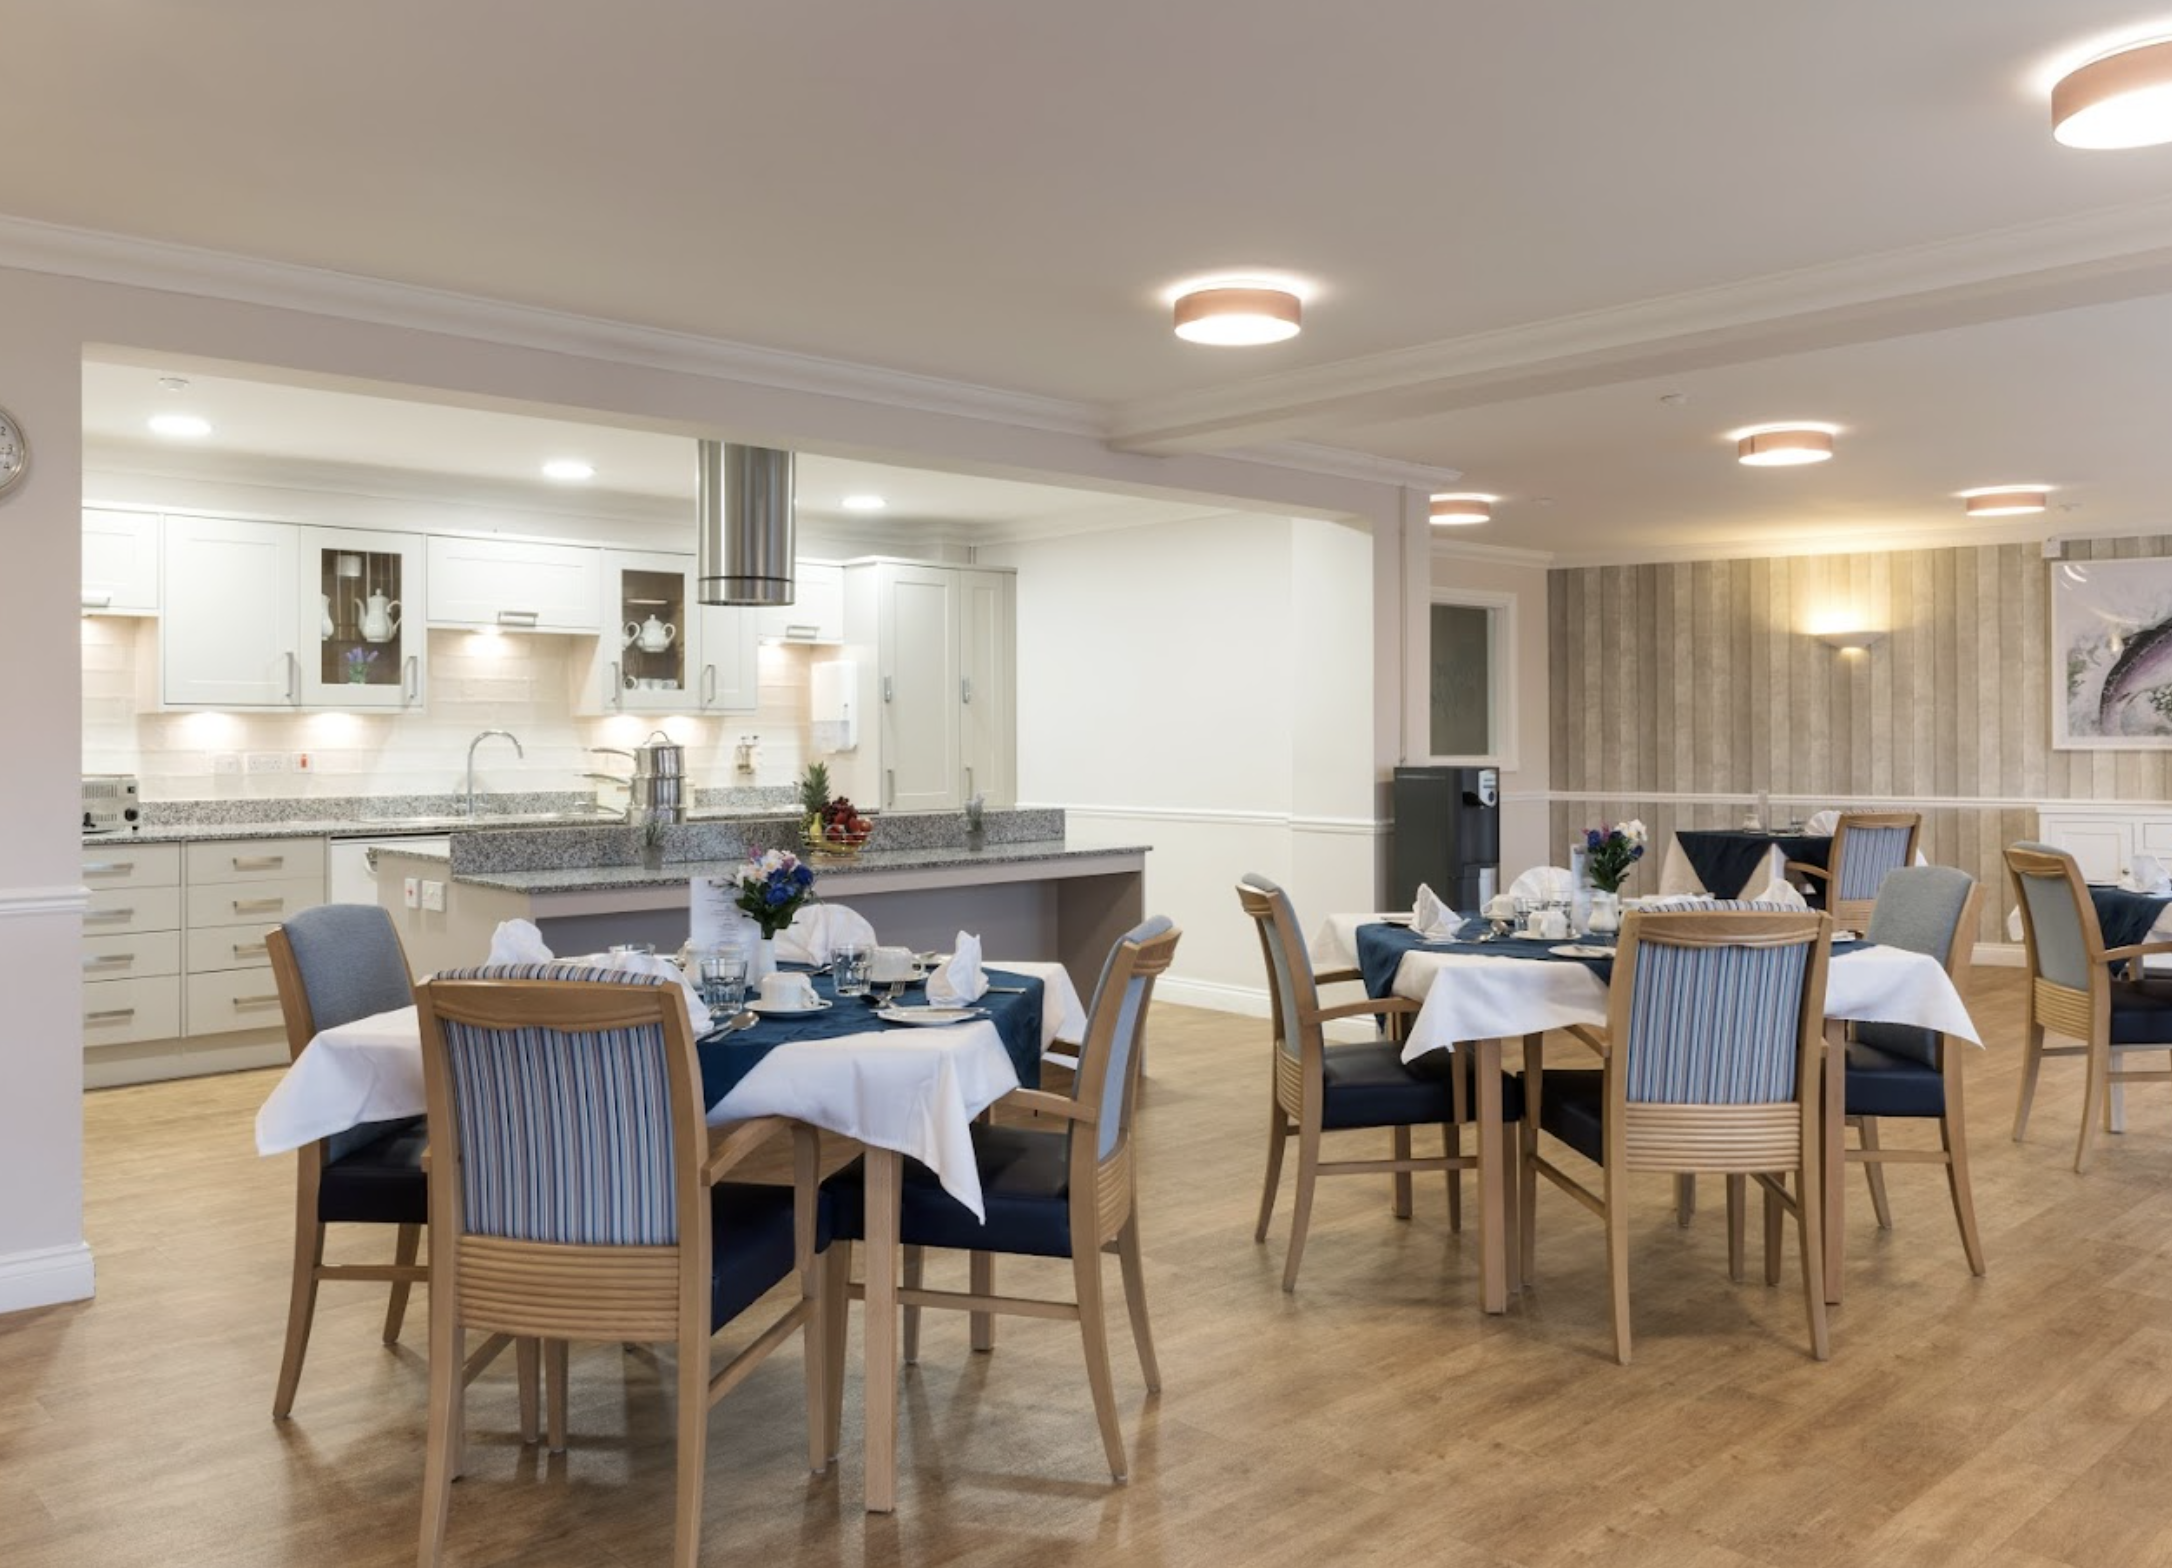 Dining area of Shire Hall care home in Cardiff, Wales